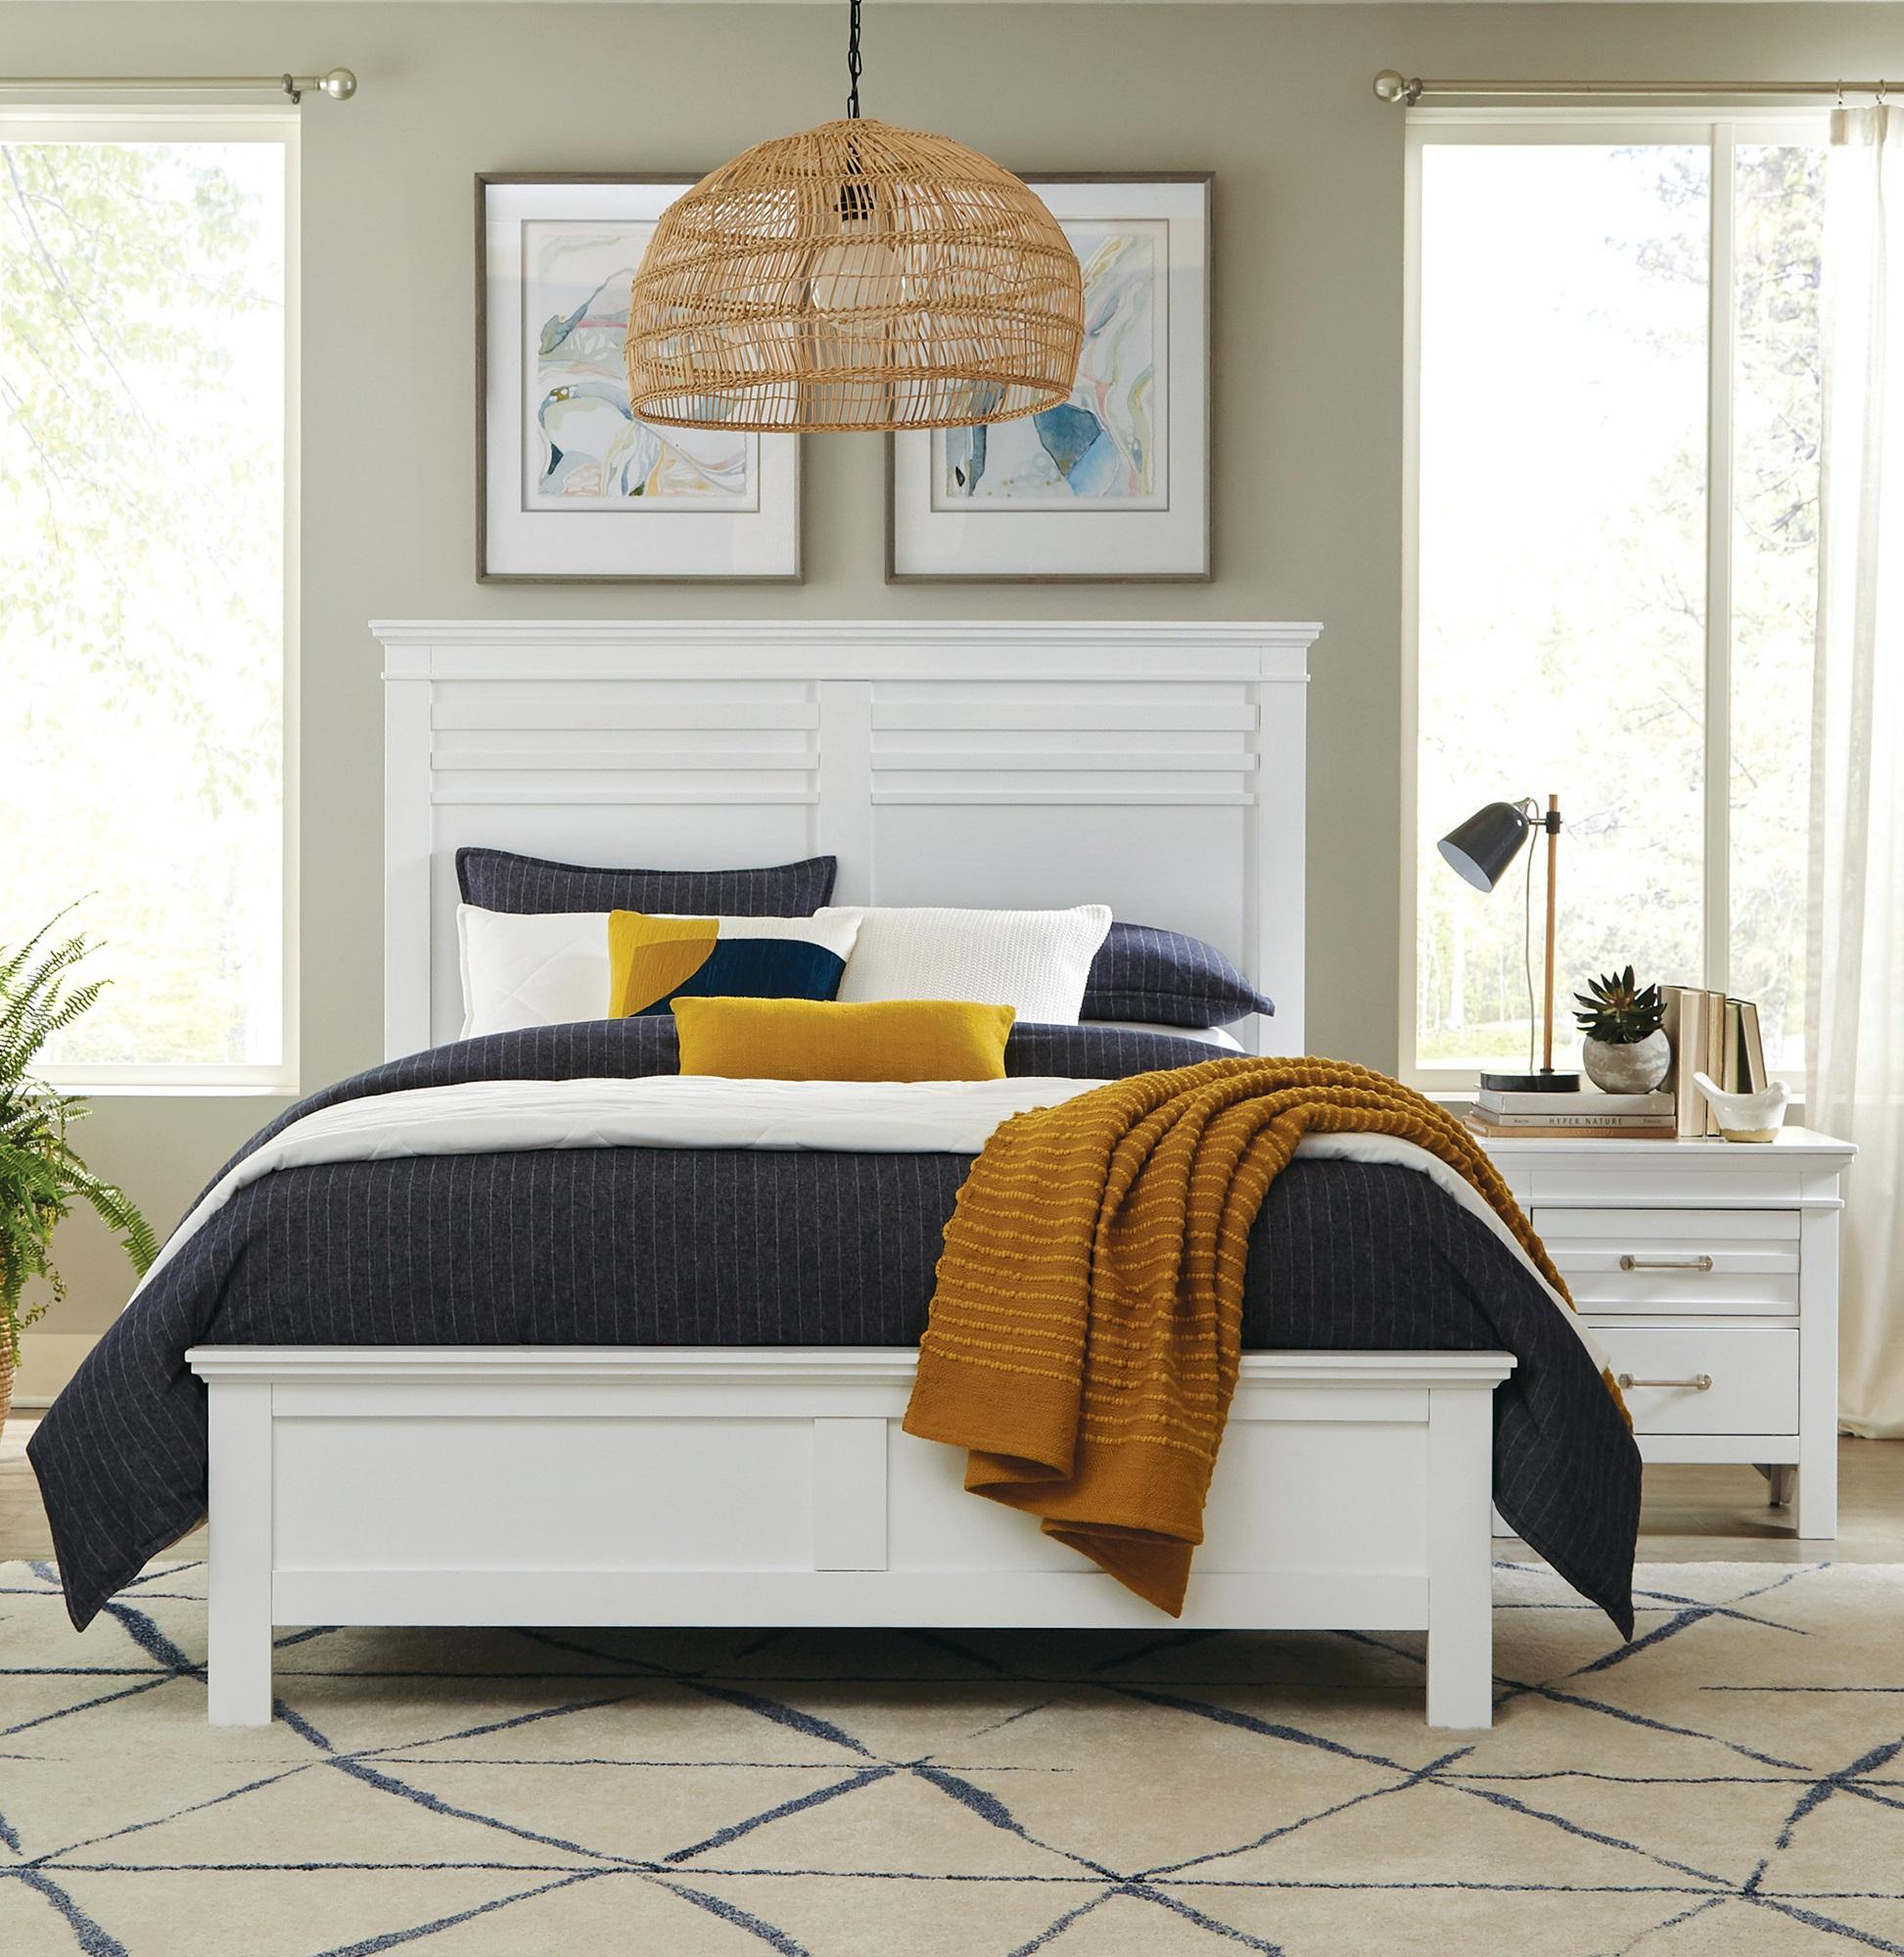 Transitional Bed and 2 Nightstands Set 1675WK-1CK*-3PC Blaire Farm 1675WK-1CK*-3PC in White 